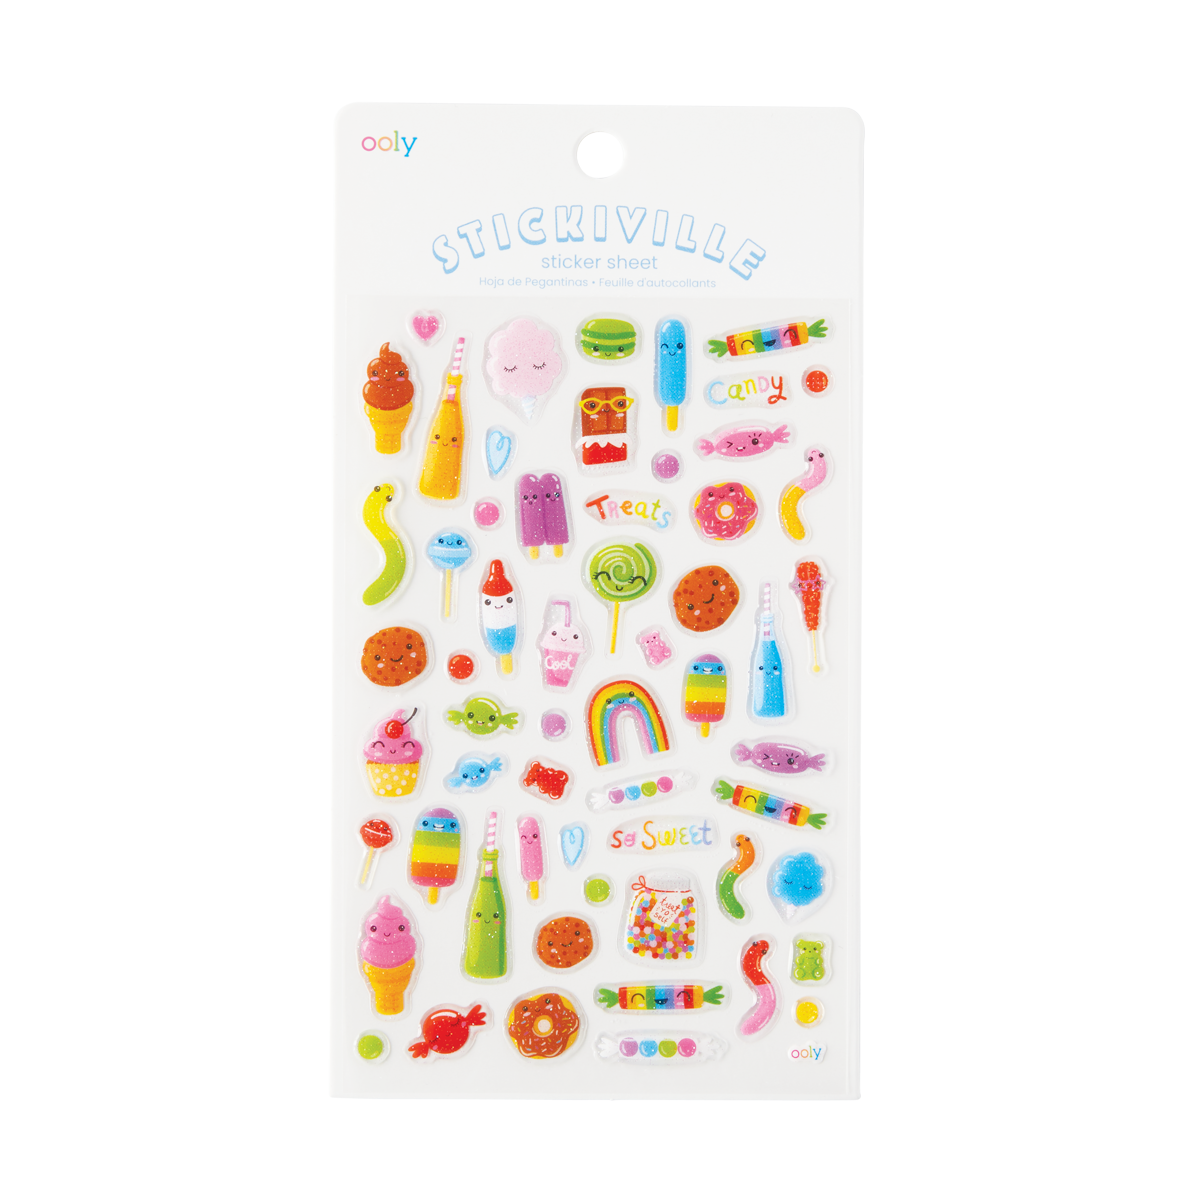 Candy Snacks Stickers Pack Wholesale sticker supplier 